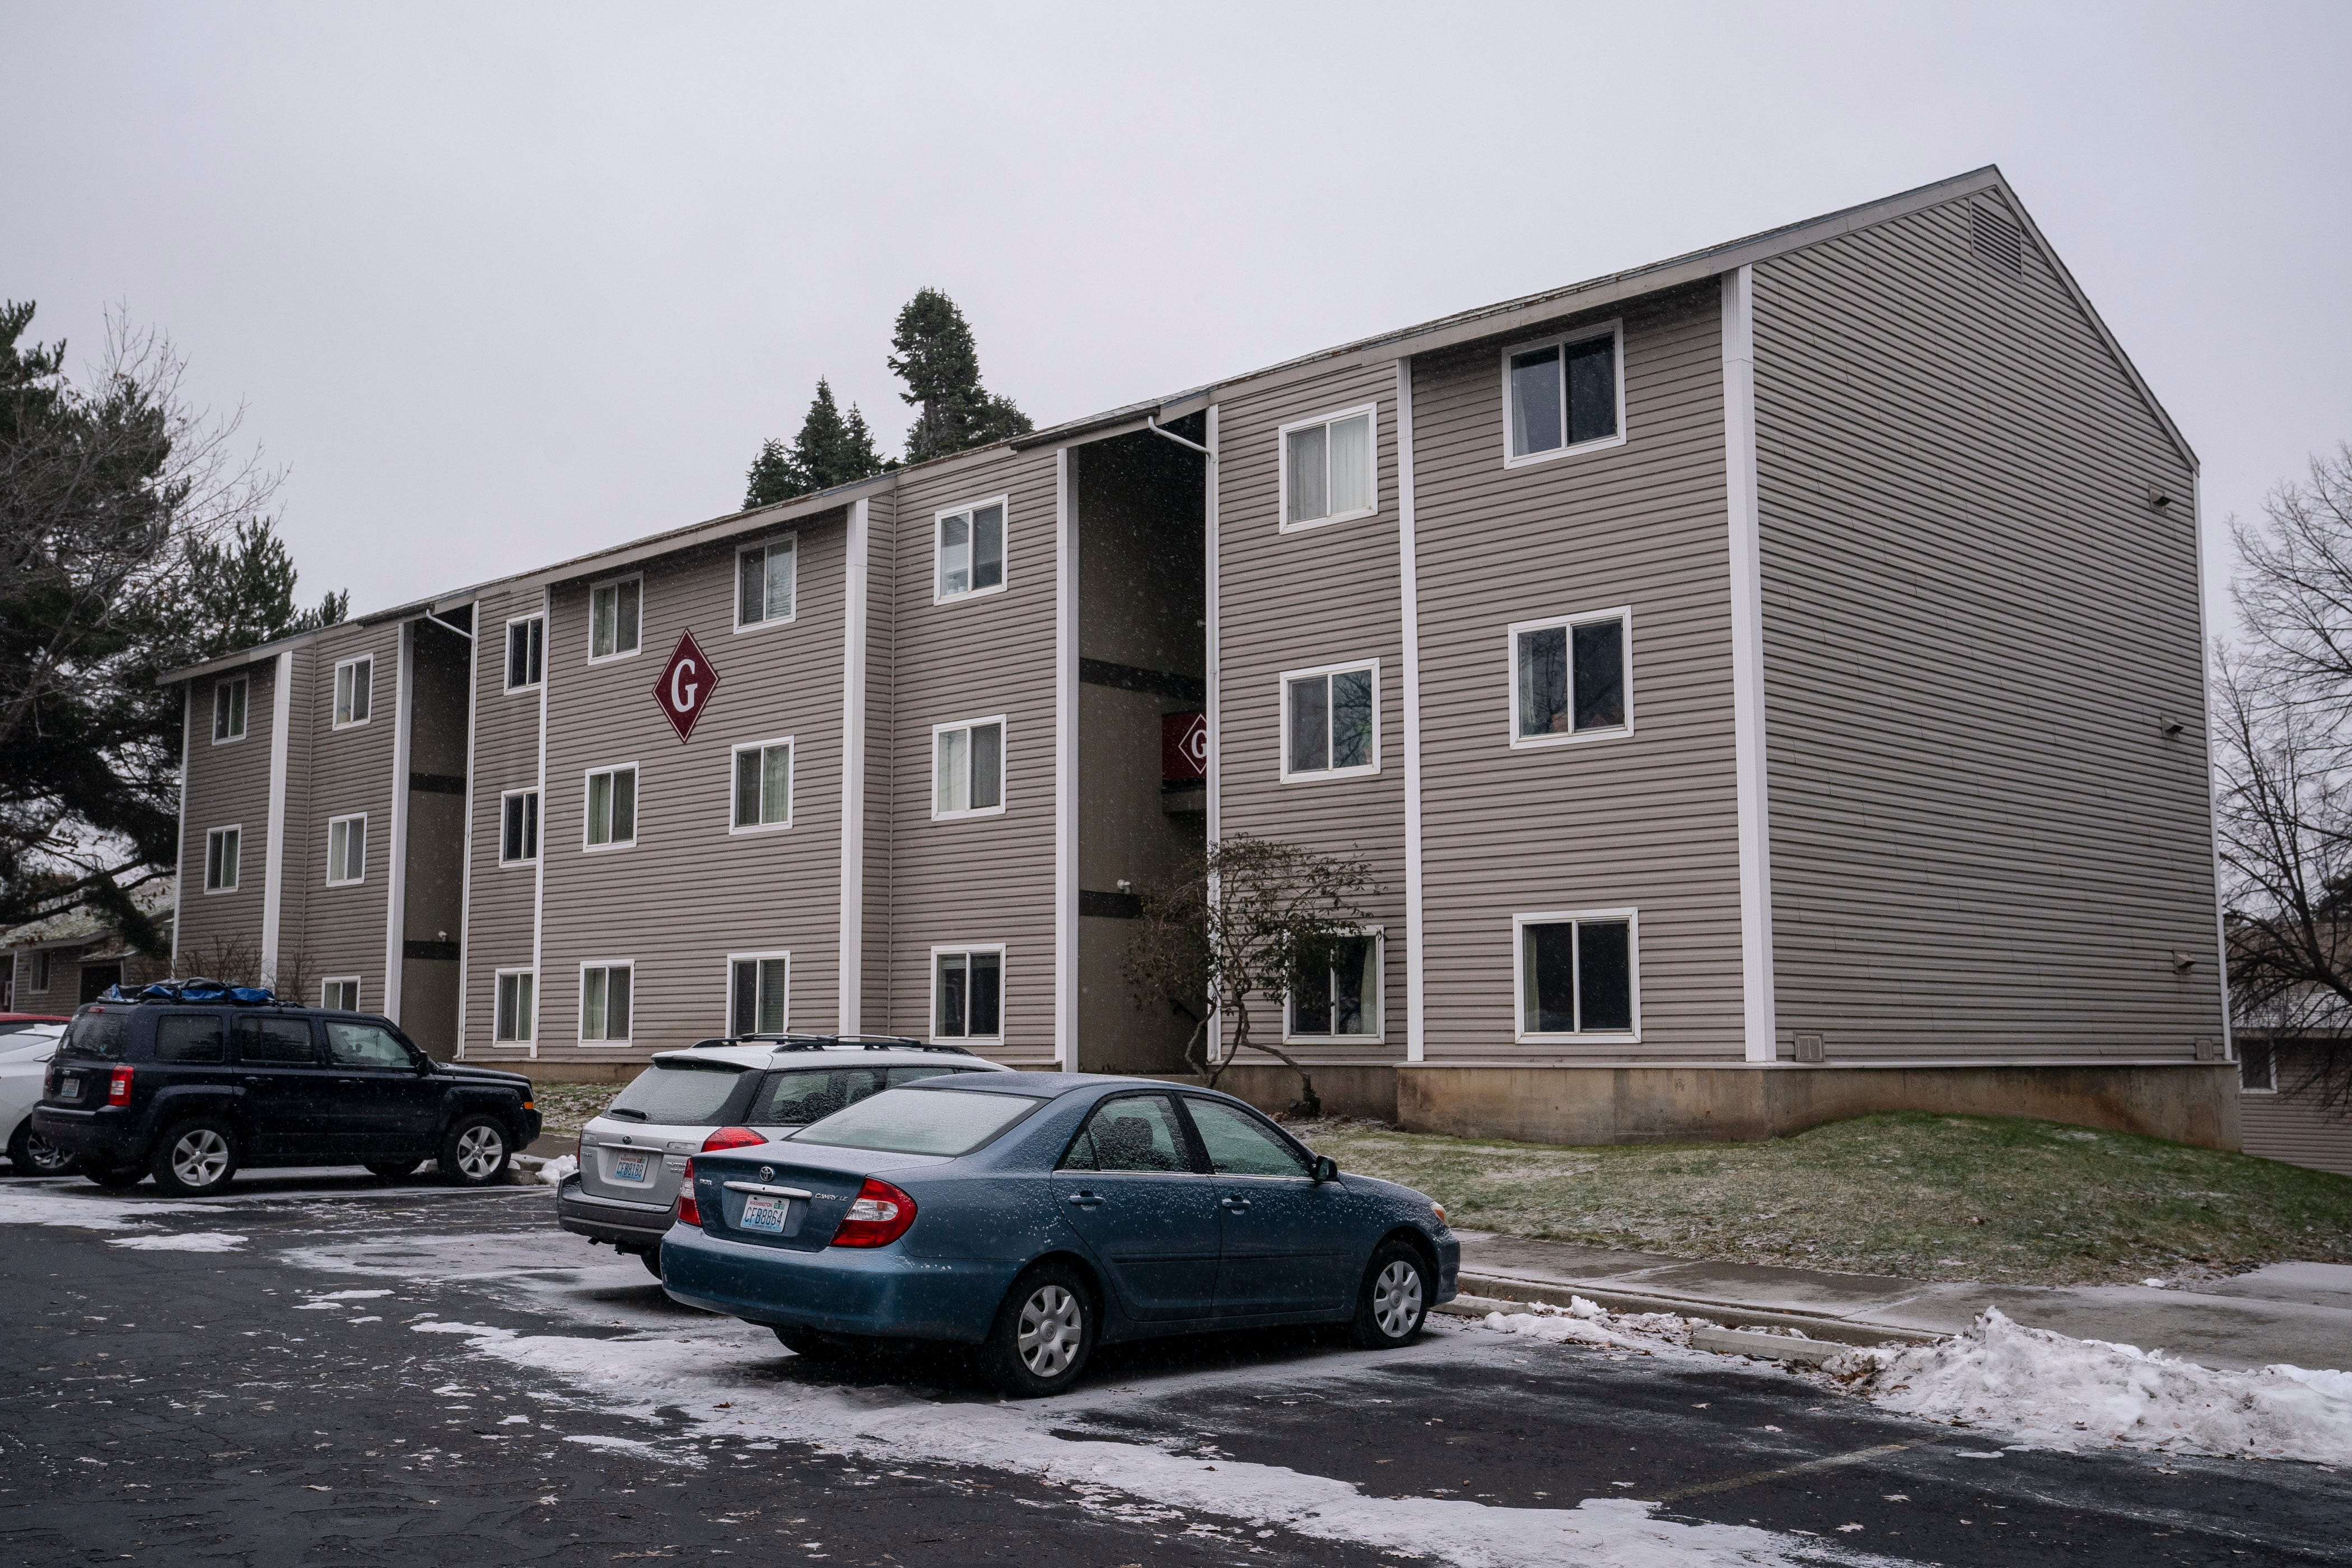 The apartment building in Pullman, Wash., where Bryan Kohberger lived when the four students were killed in Moscow, Idaho.